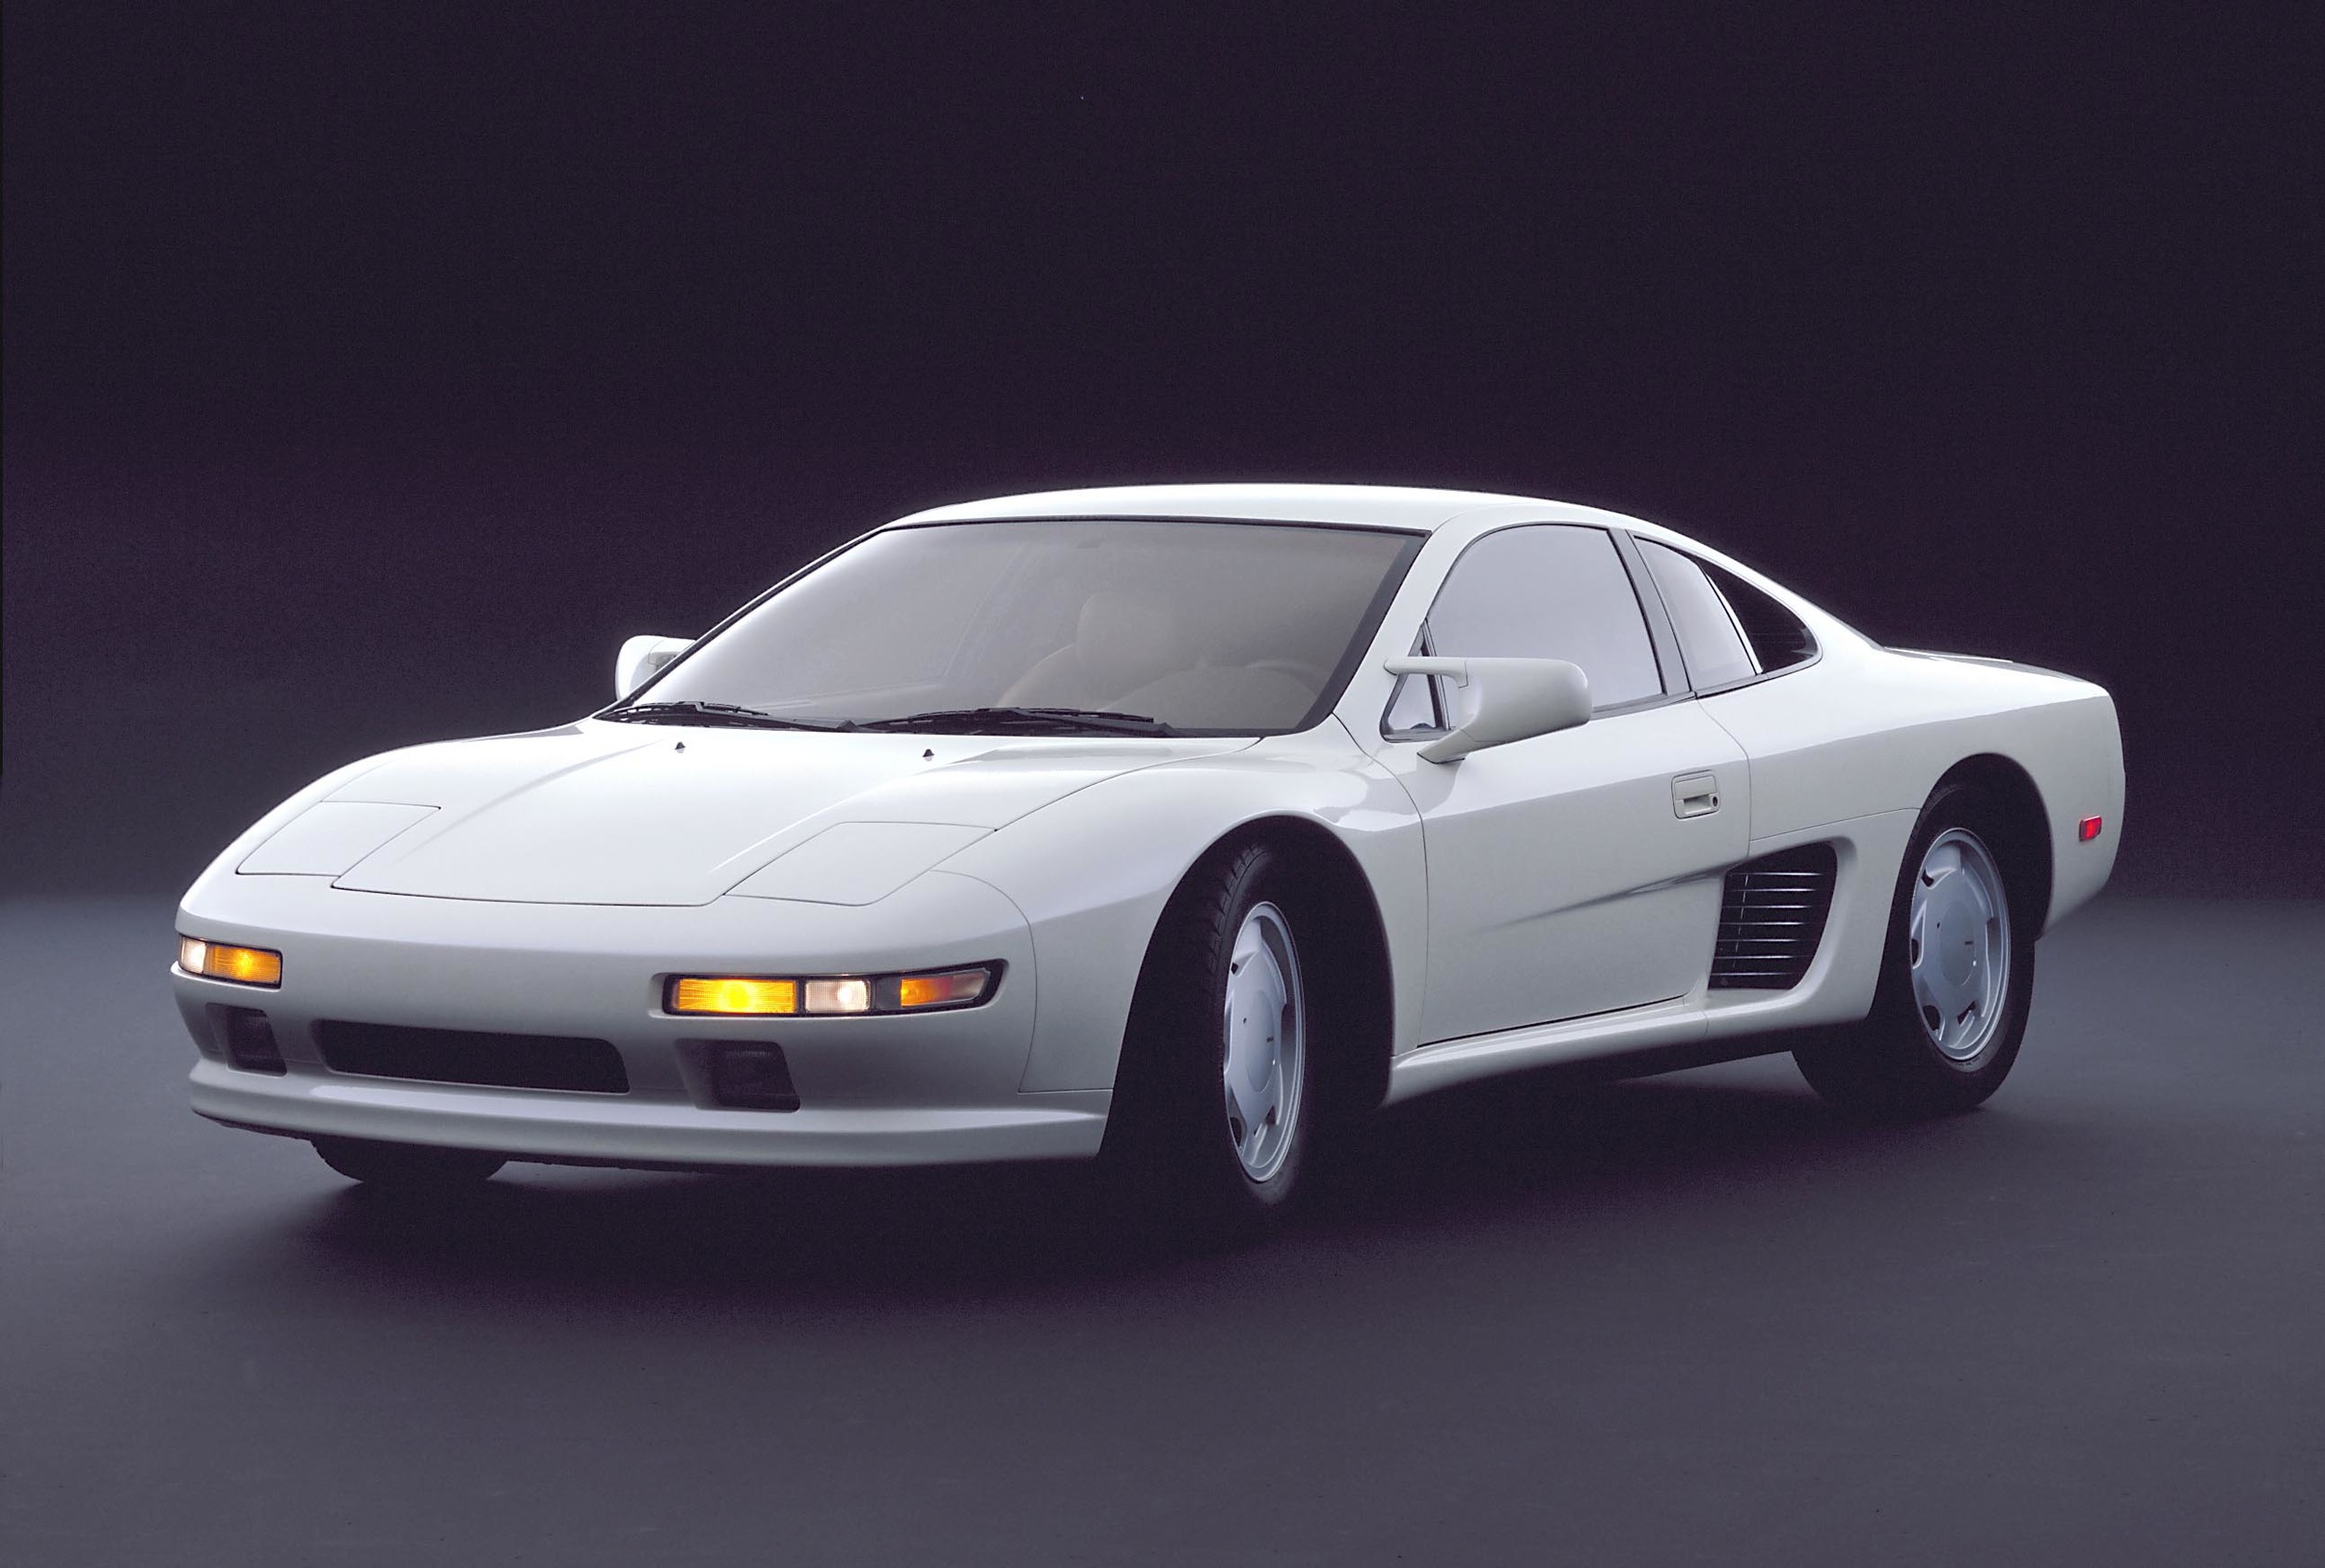 1987 Nissan MID4 Type II concept 01 - Retro Gallery Archive (Full Size)